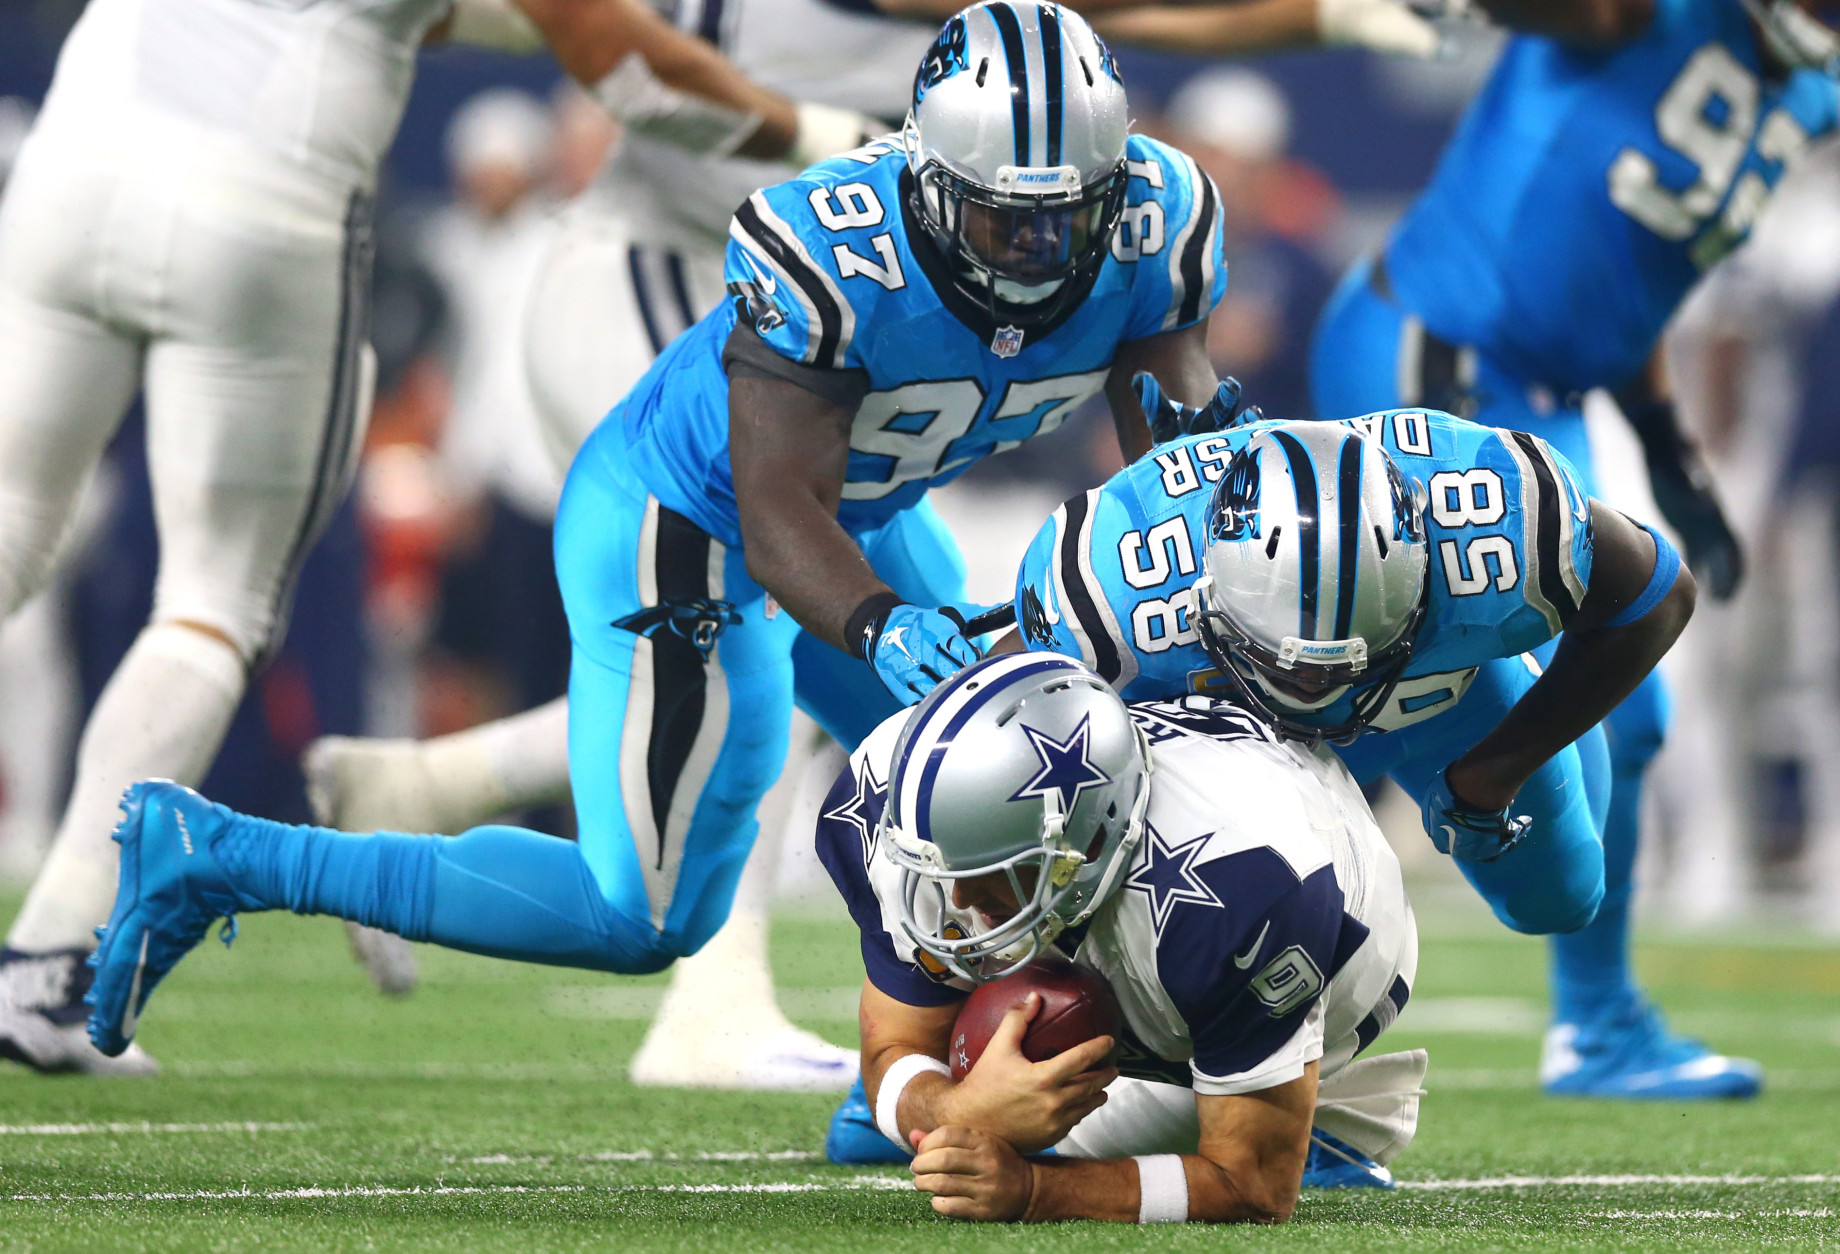 ARLINGTON, TX - NOVEMBER 26: Tony Romo #9 of the Dallas Cowboys is taken down by Thomas Davis #58 and Mario Addison #97 of the Carolina Panthers in the third quarter at AT&amp;T Stadium on November 26, 2015 in Arlington, Texas. Romo left the field following the play. (Photo by Ronald Martinez/Getty Images)